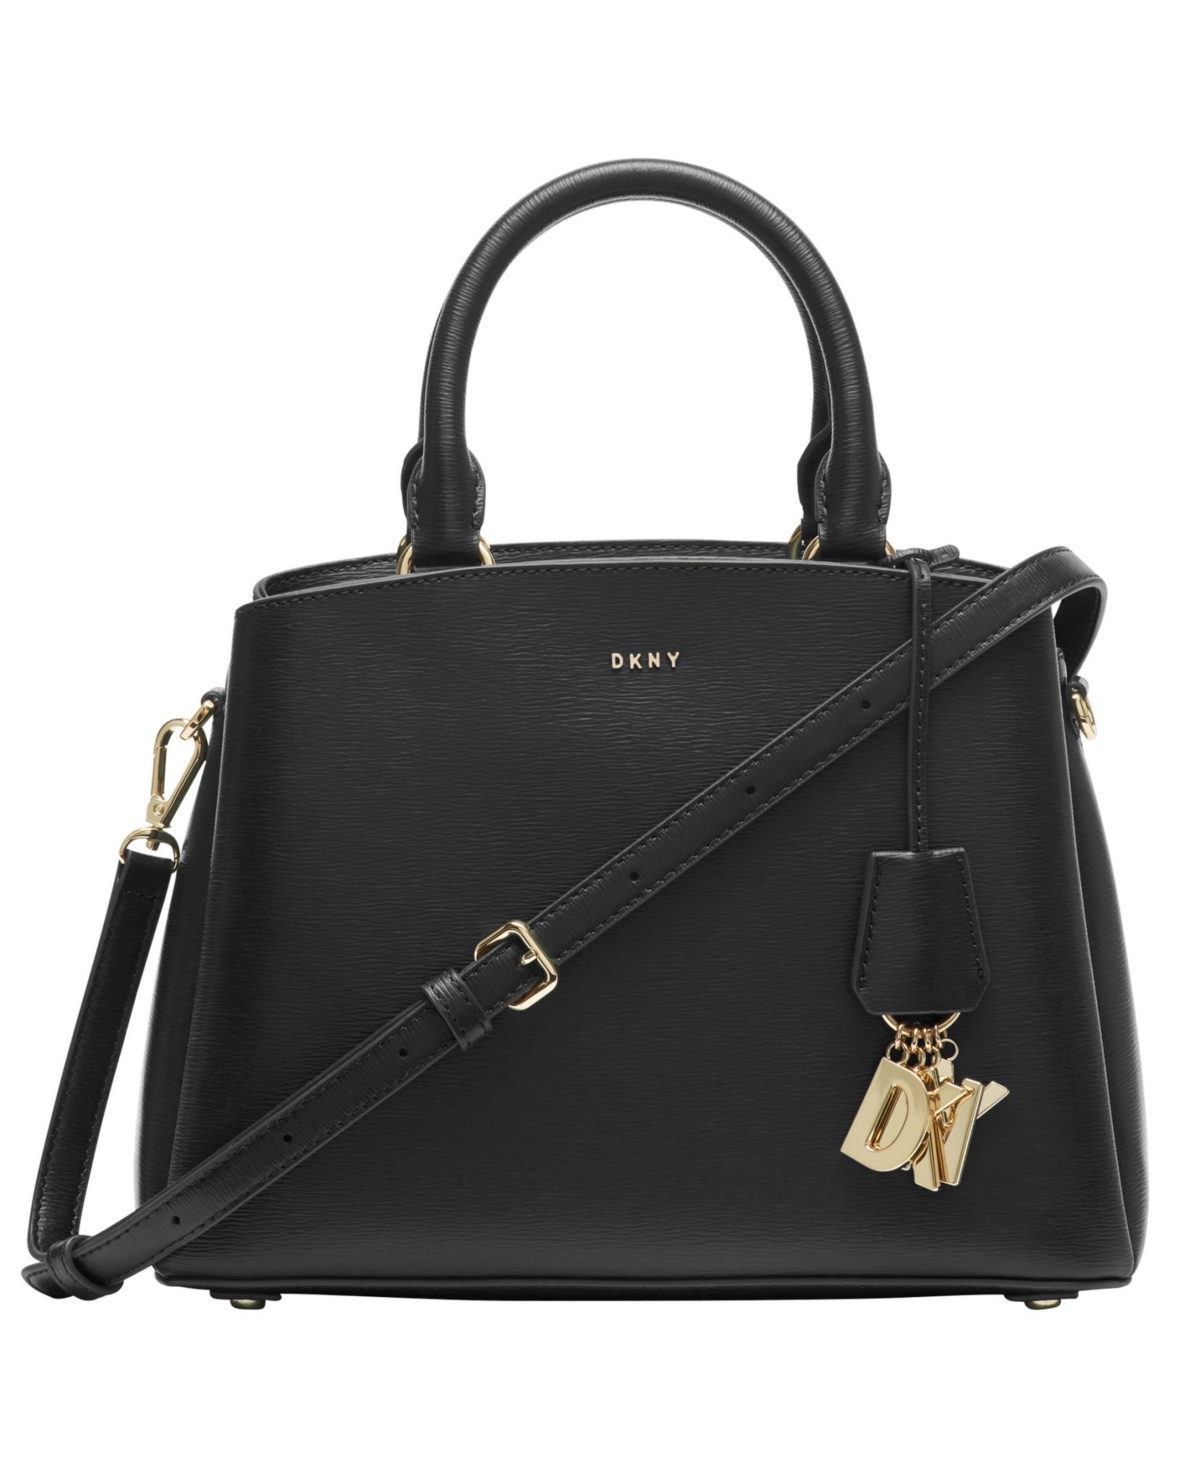 Dkny Paige Medium Satchel With Convertible Strap In Black,gold